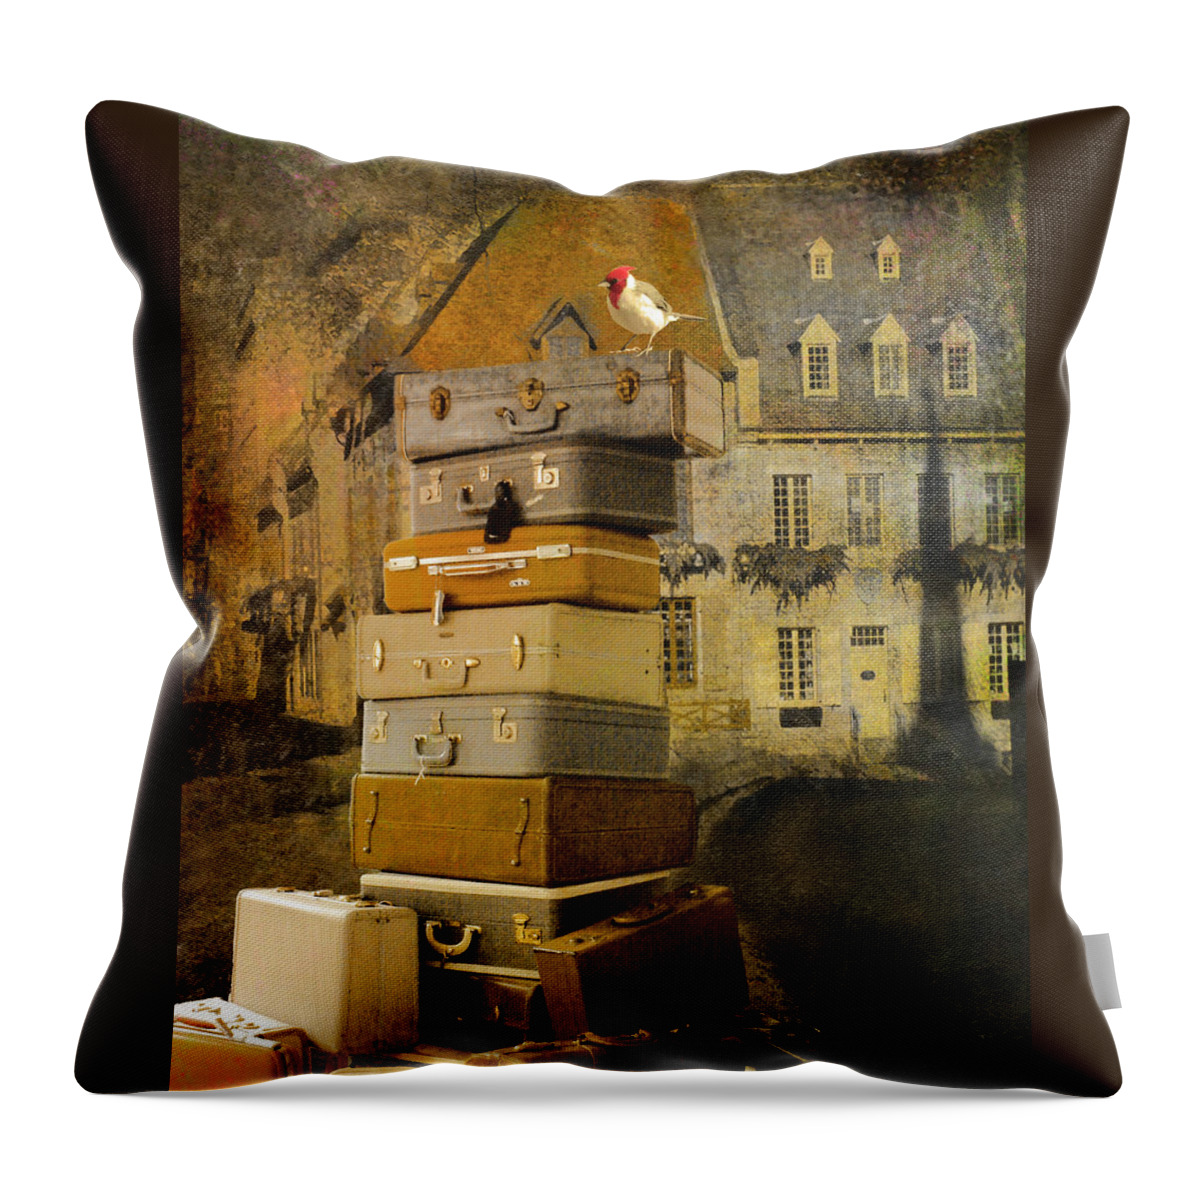 Quebec Throw Pillow featuring the digital art Leaving Quebec by Jeff Burgess